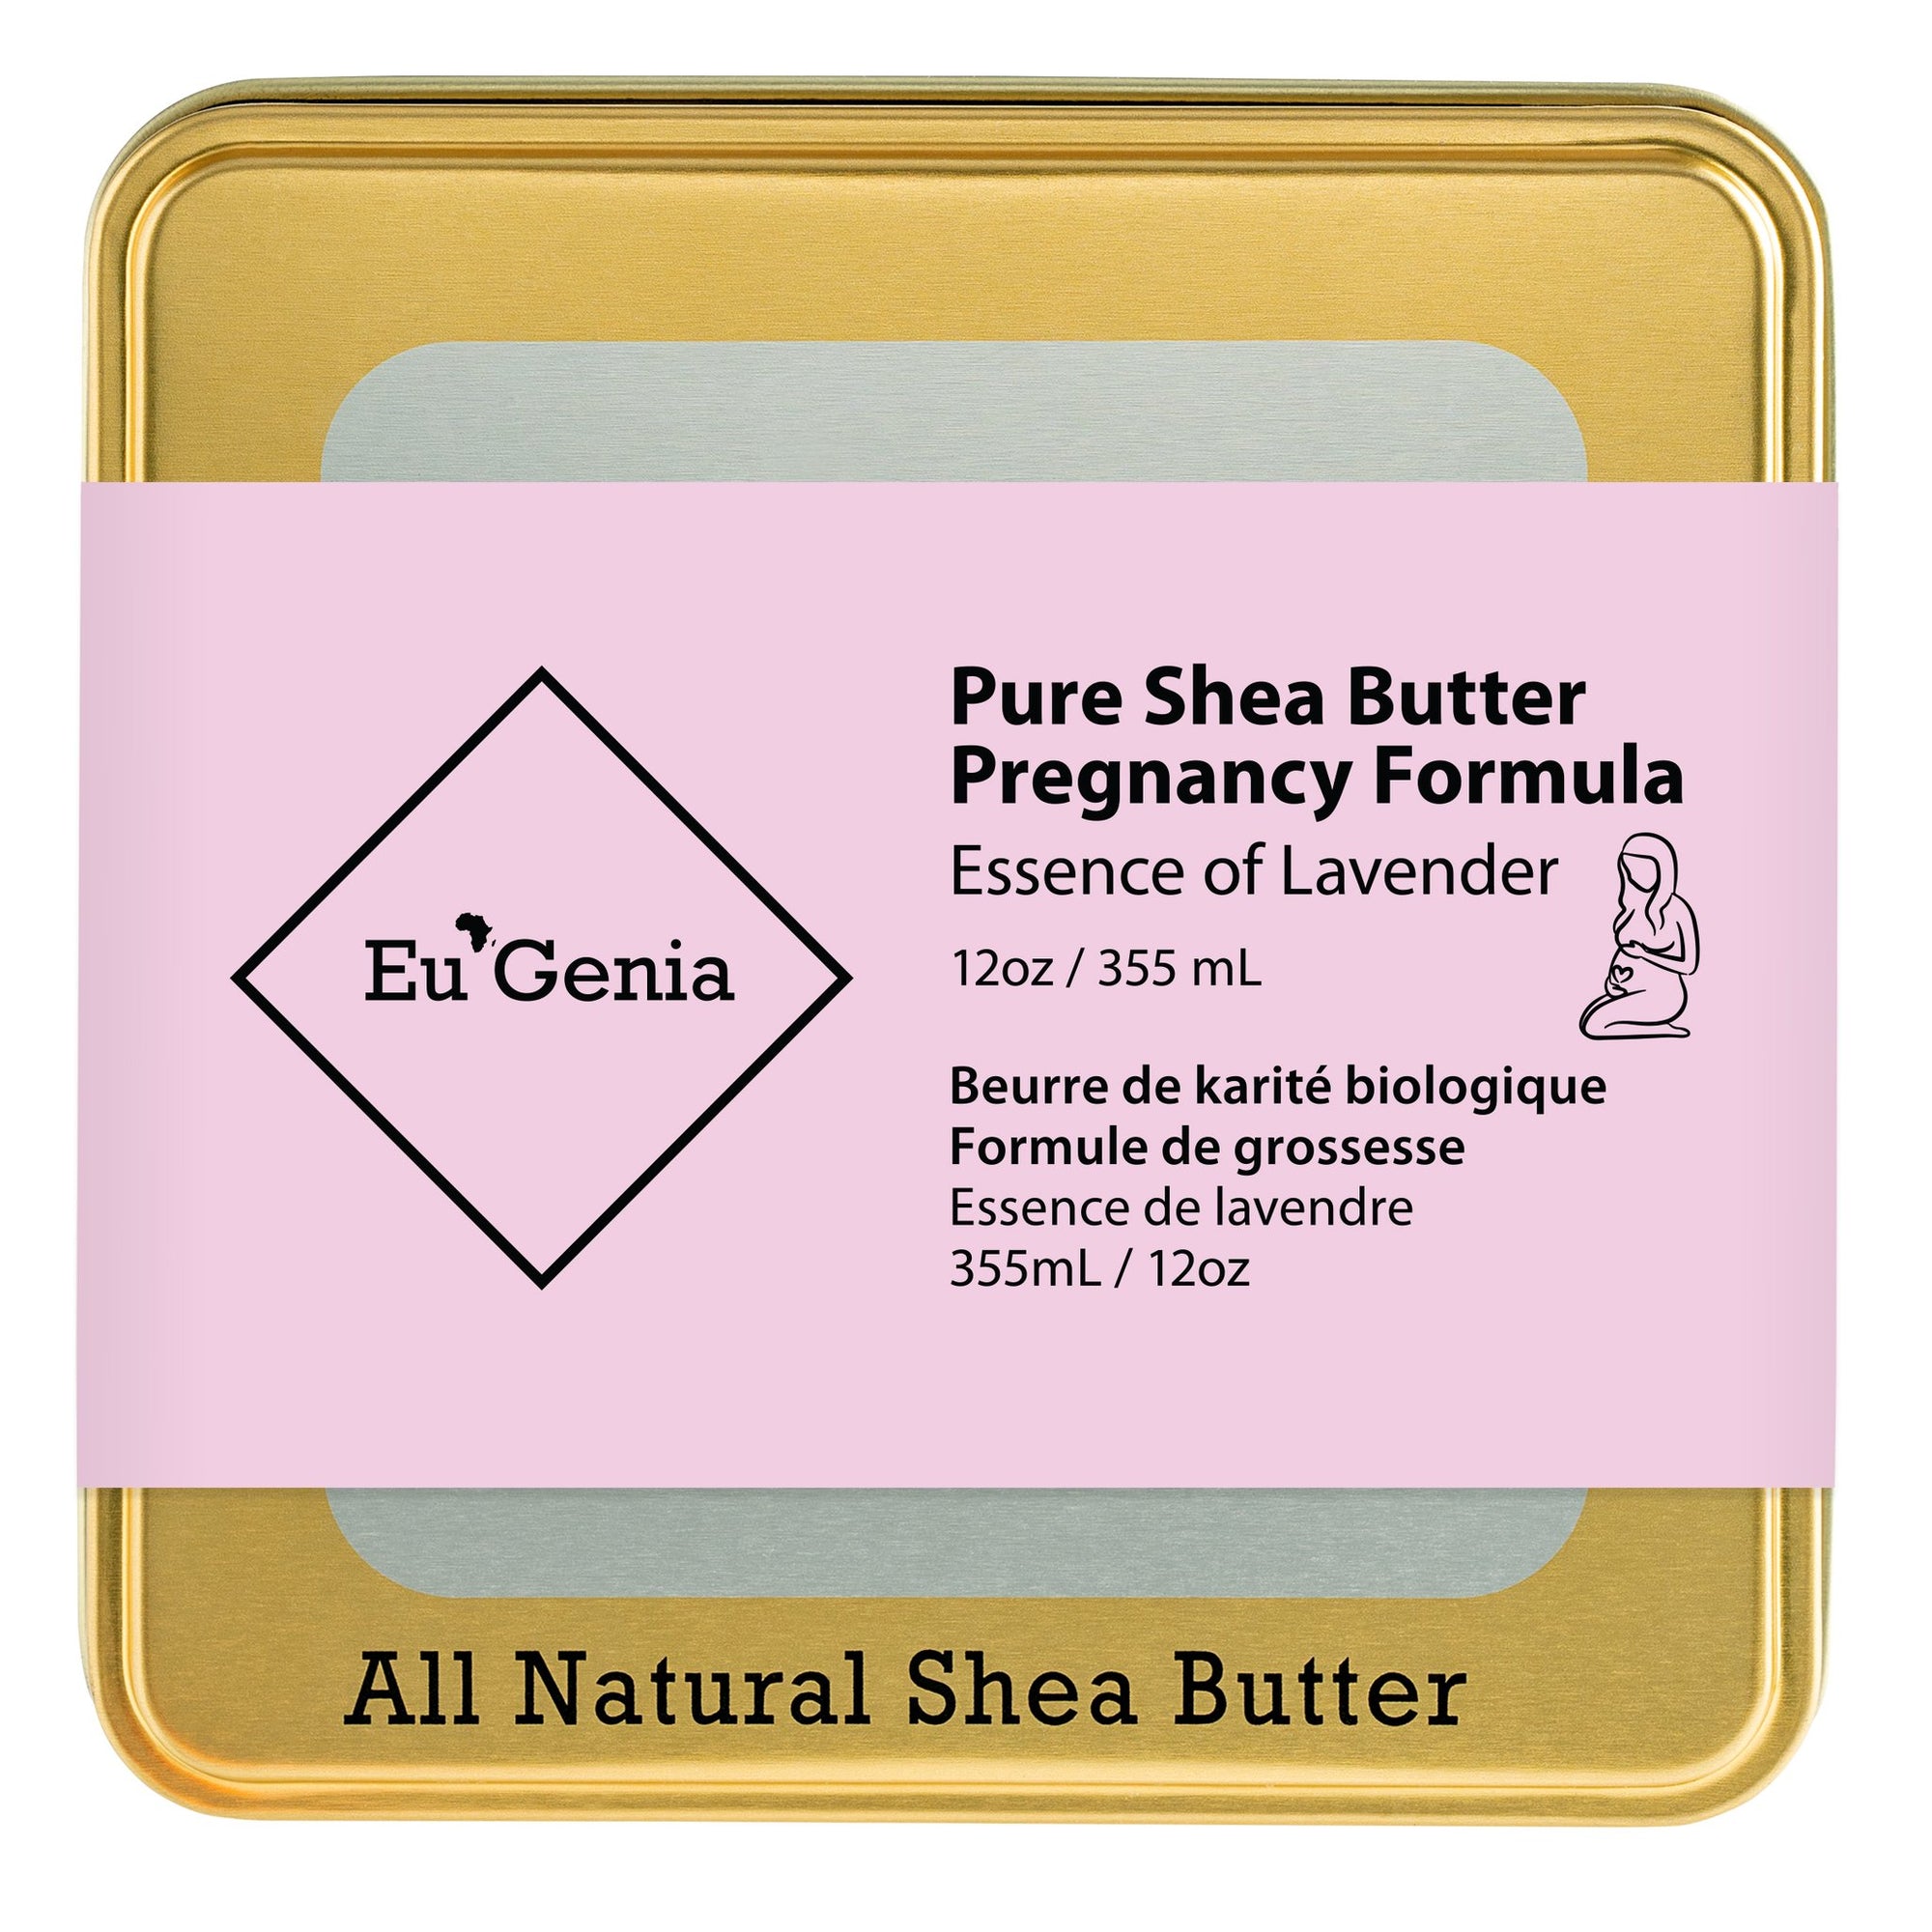 Gold Tin that reads "Pure Shea Butter Pregnancy Essence of Lavender" on a white background.